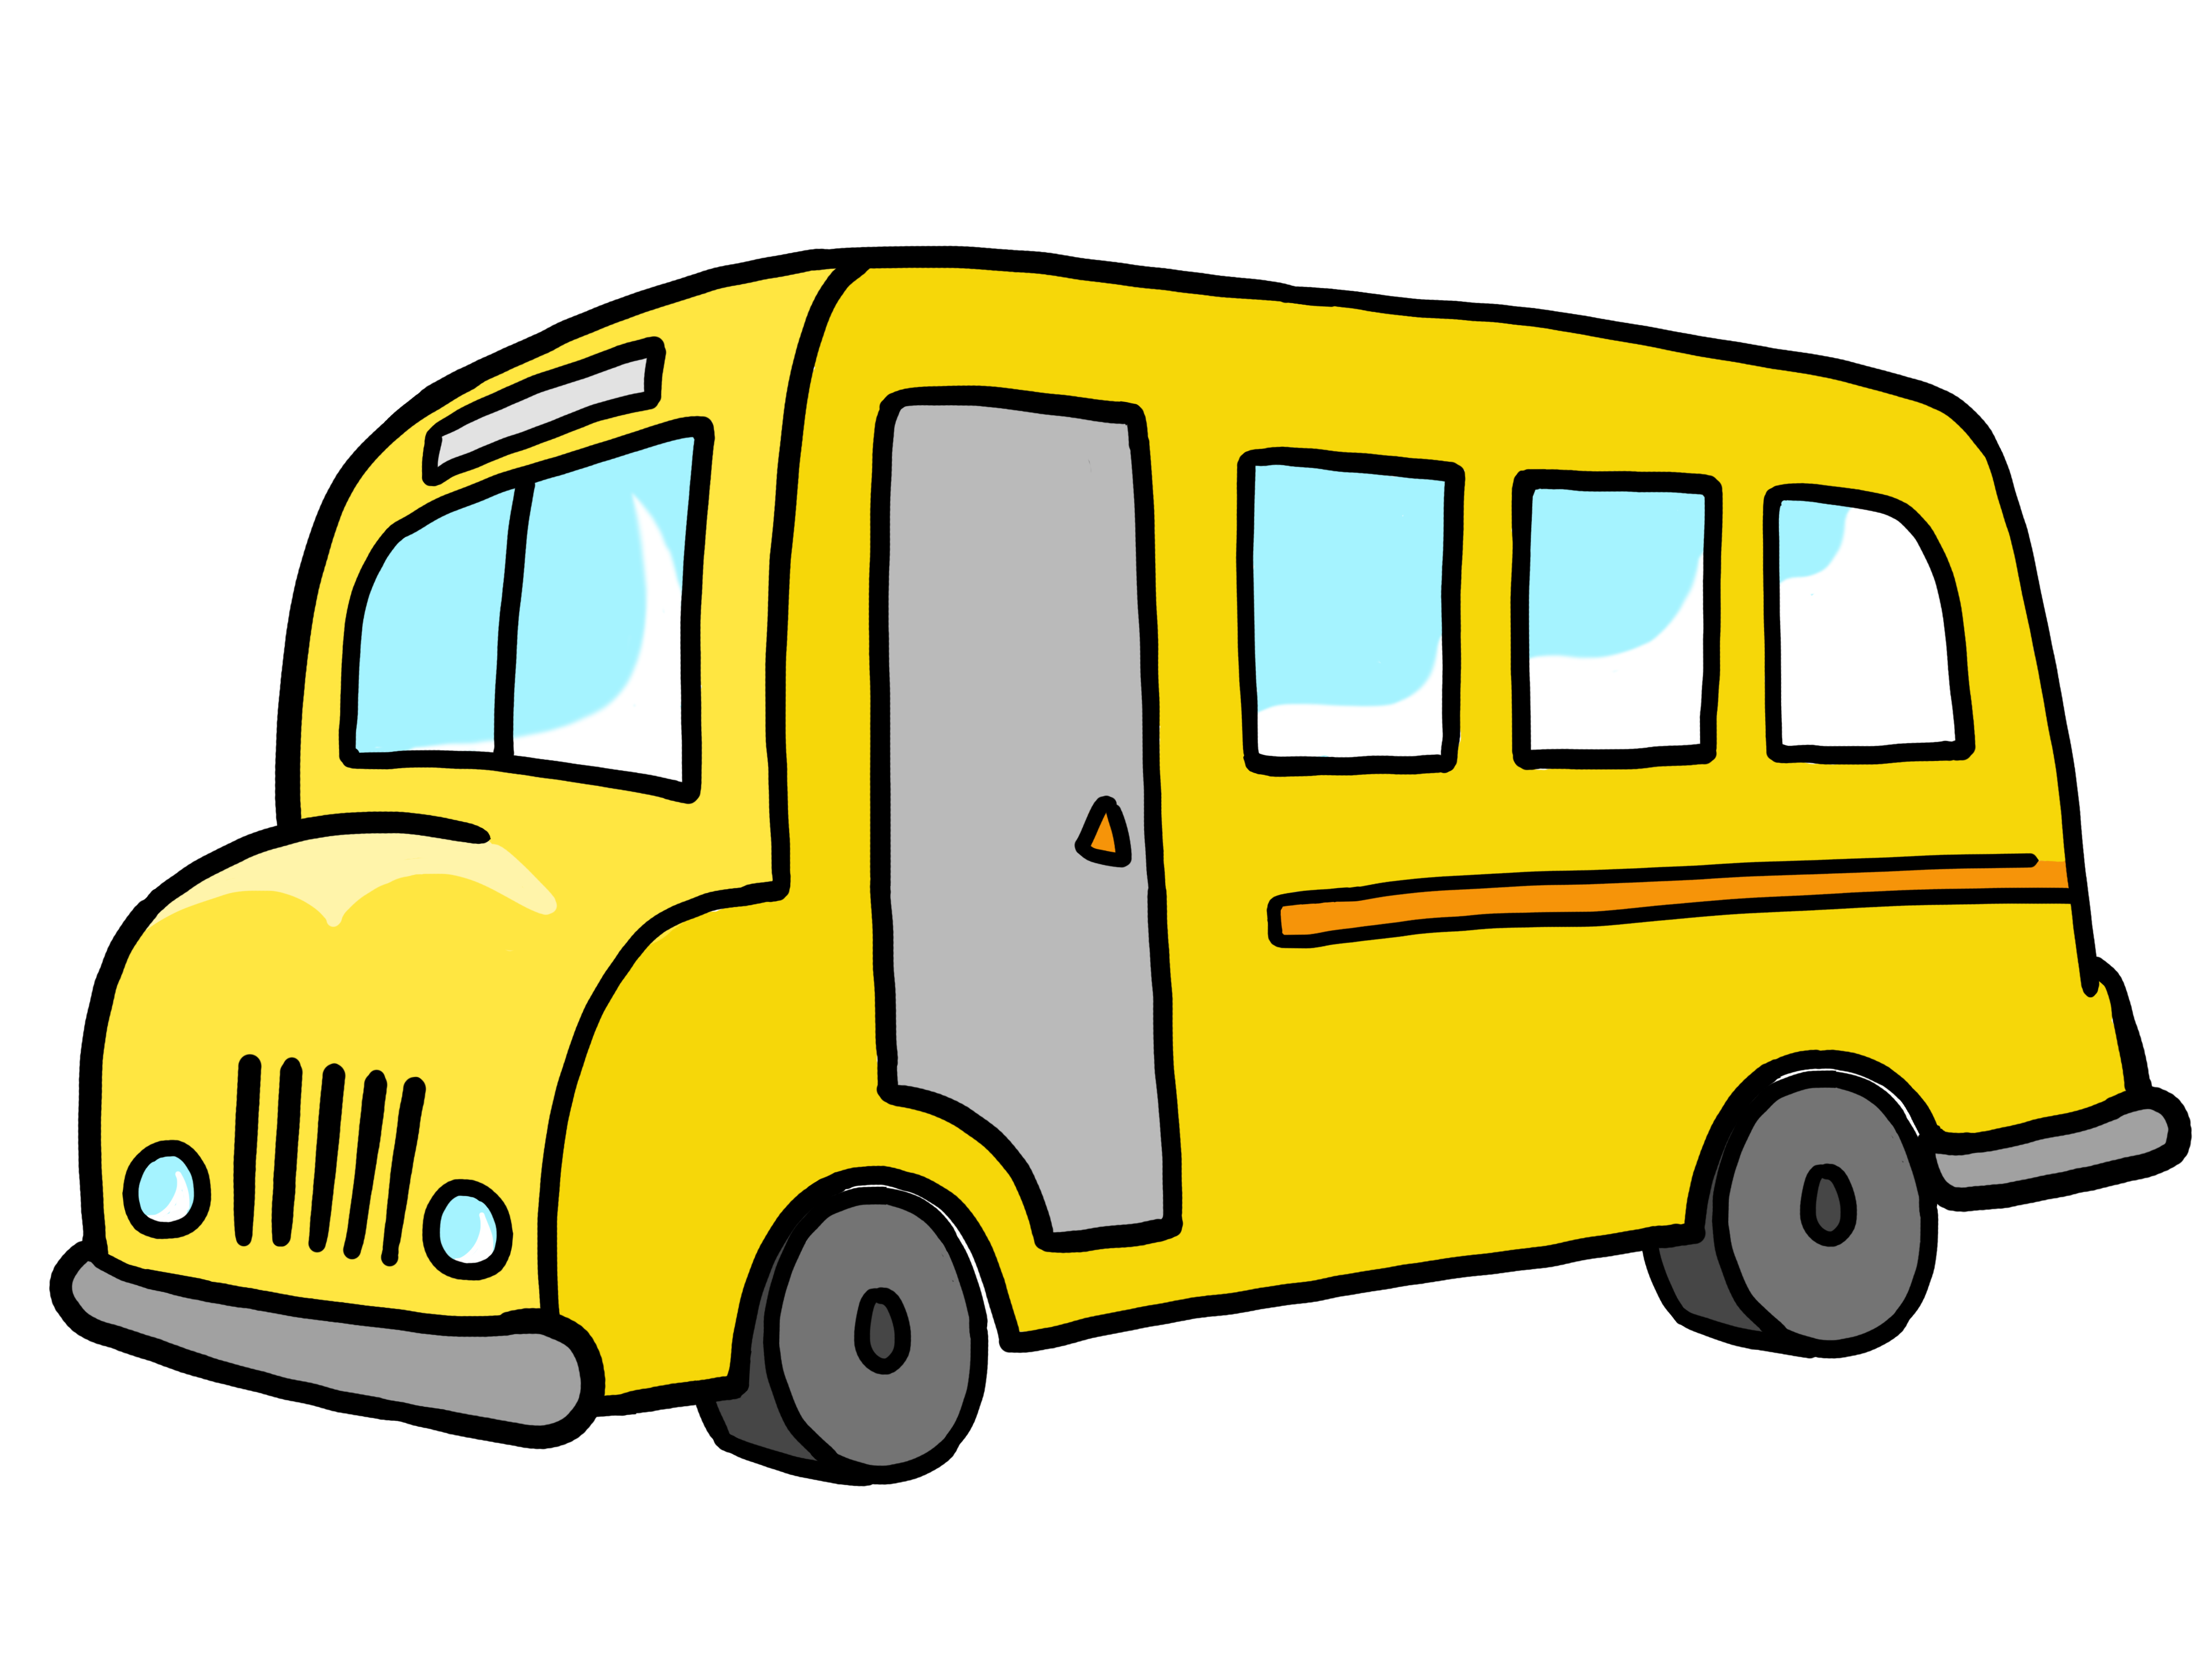 Image Of Buses - ClipArt Best